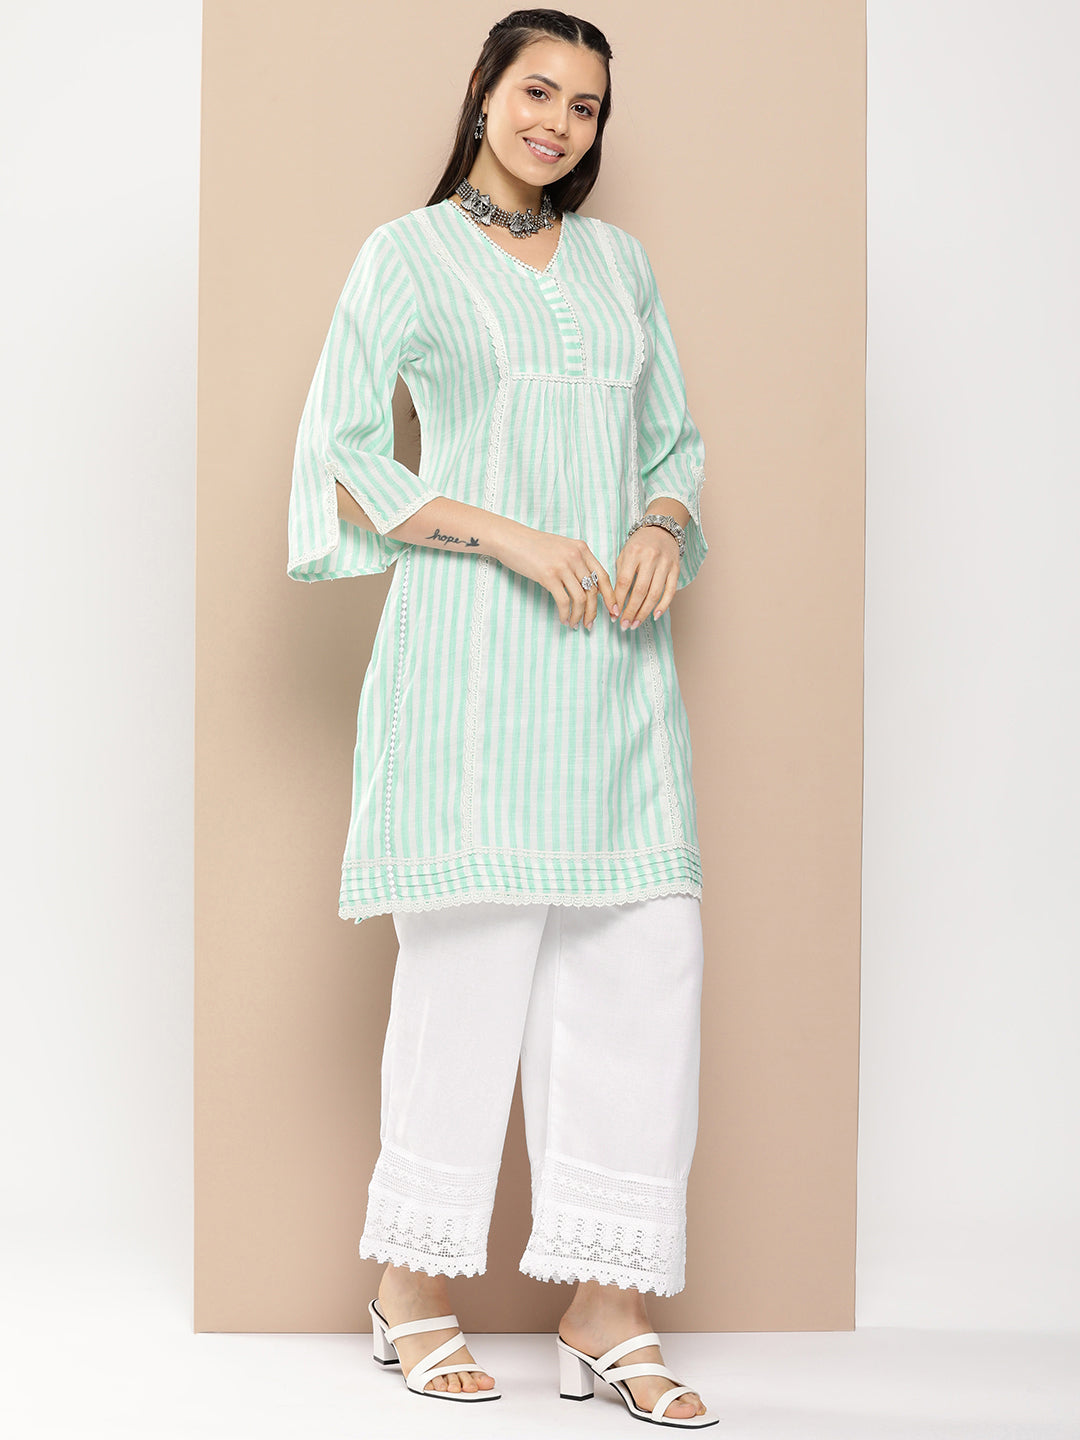 Bhama Couture Sea Green And White Striped Kurta With Lace Detailing & Off White Palazzos.